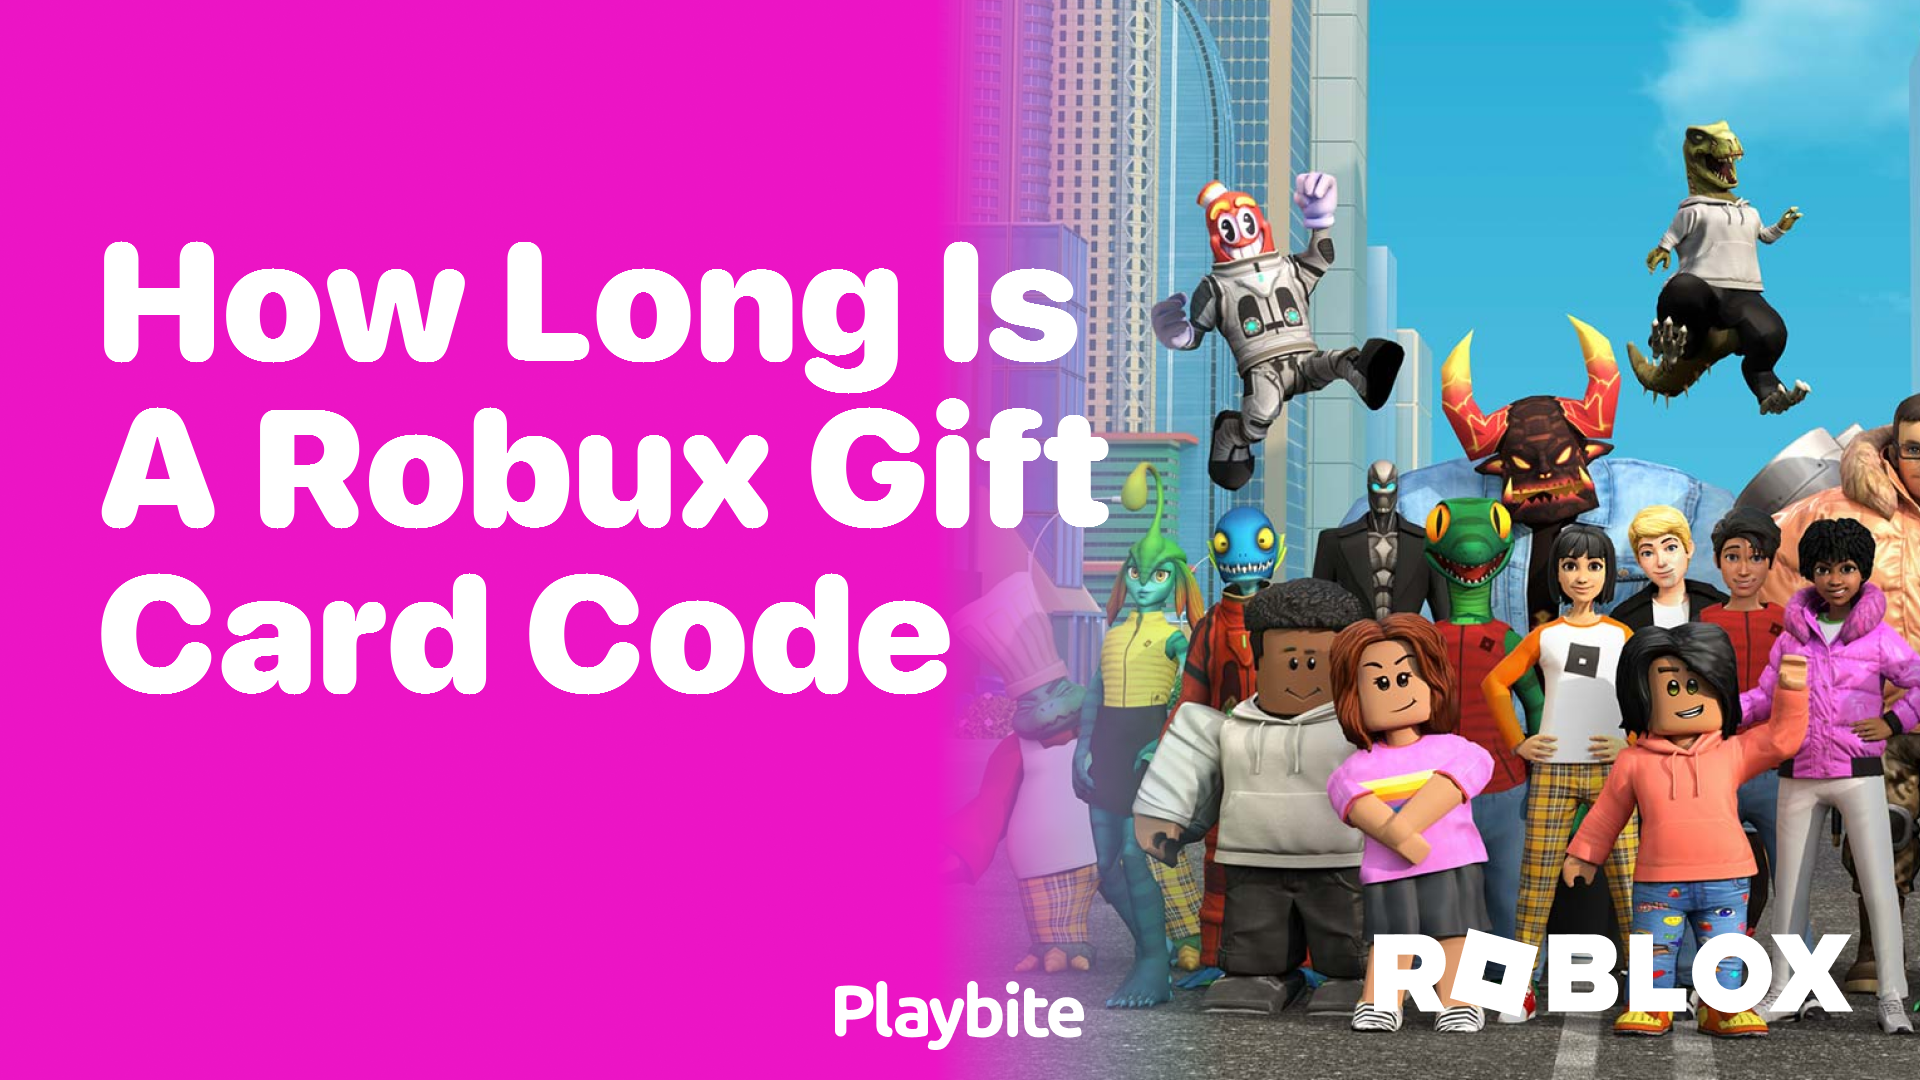 How Long is a Robux Gift Card Code?